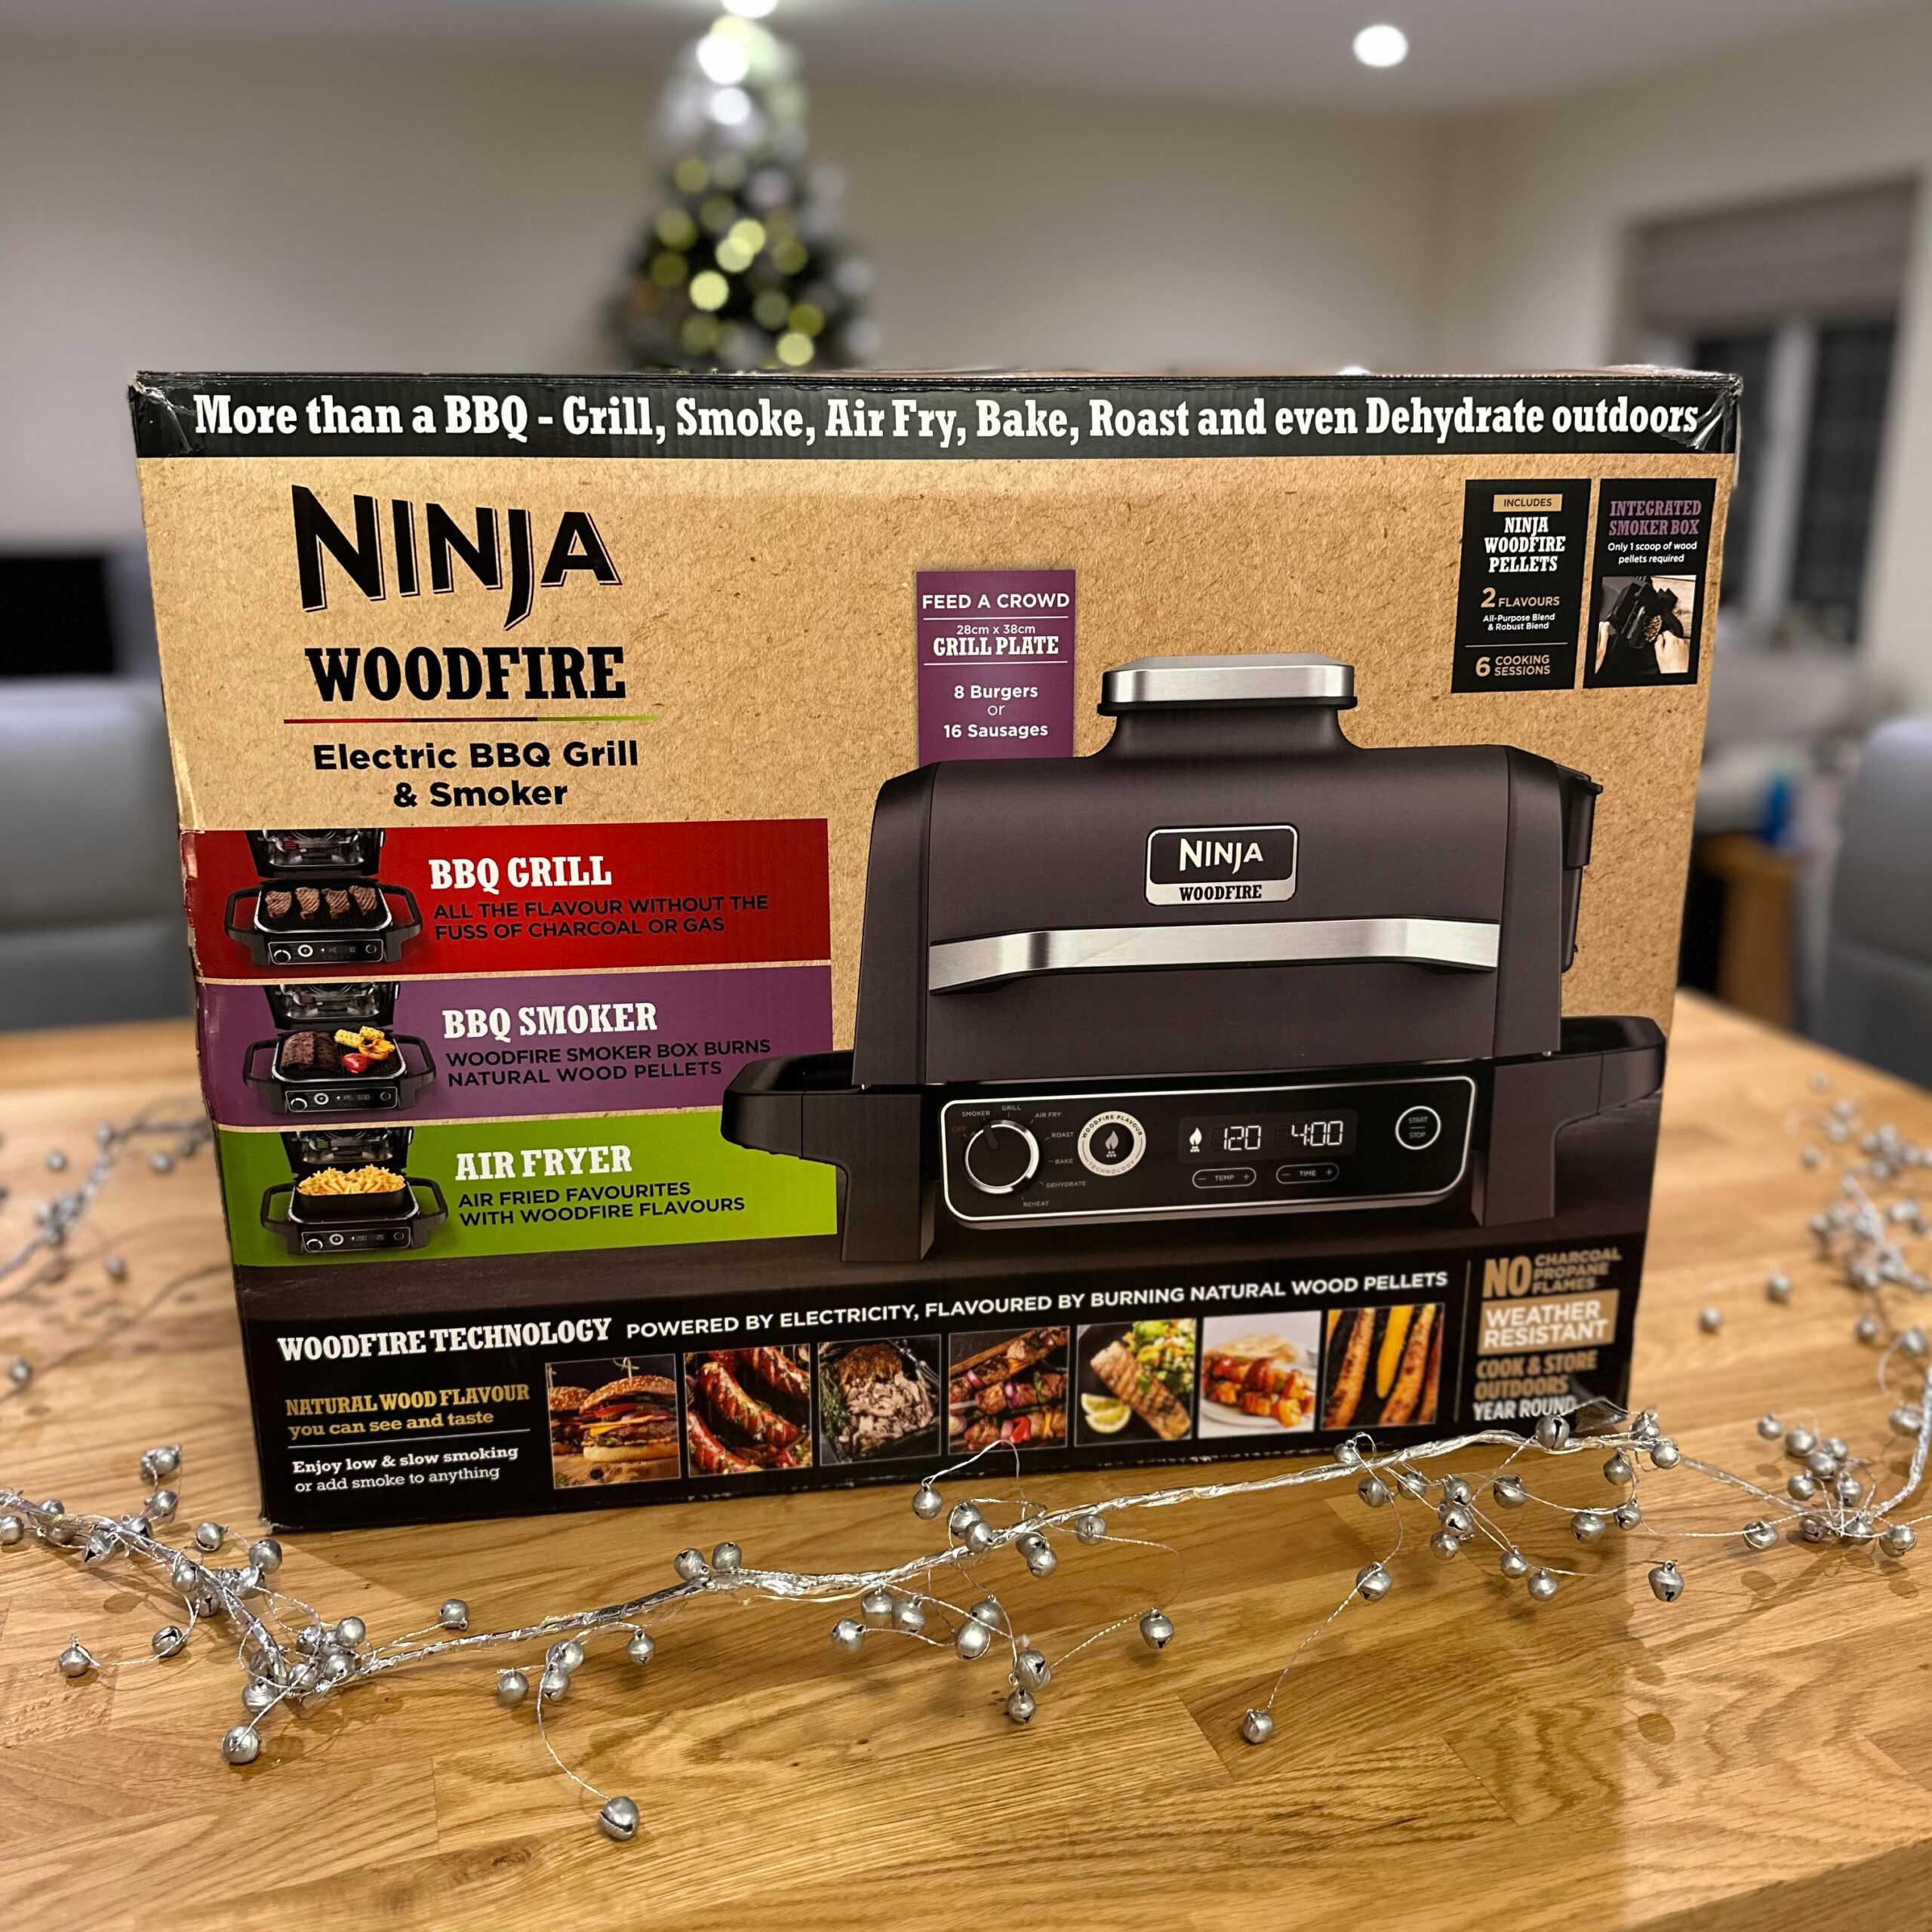 Ninja Woodfire Outdoor Grill Review